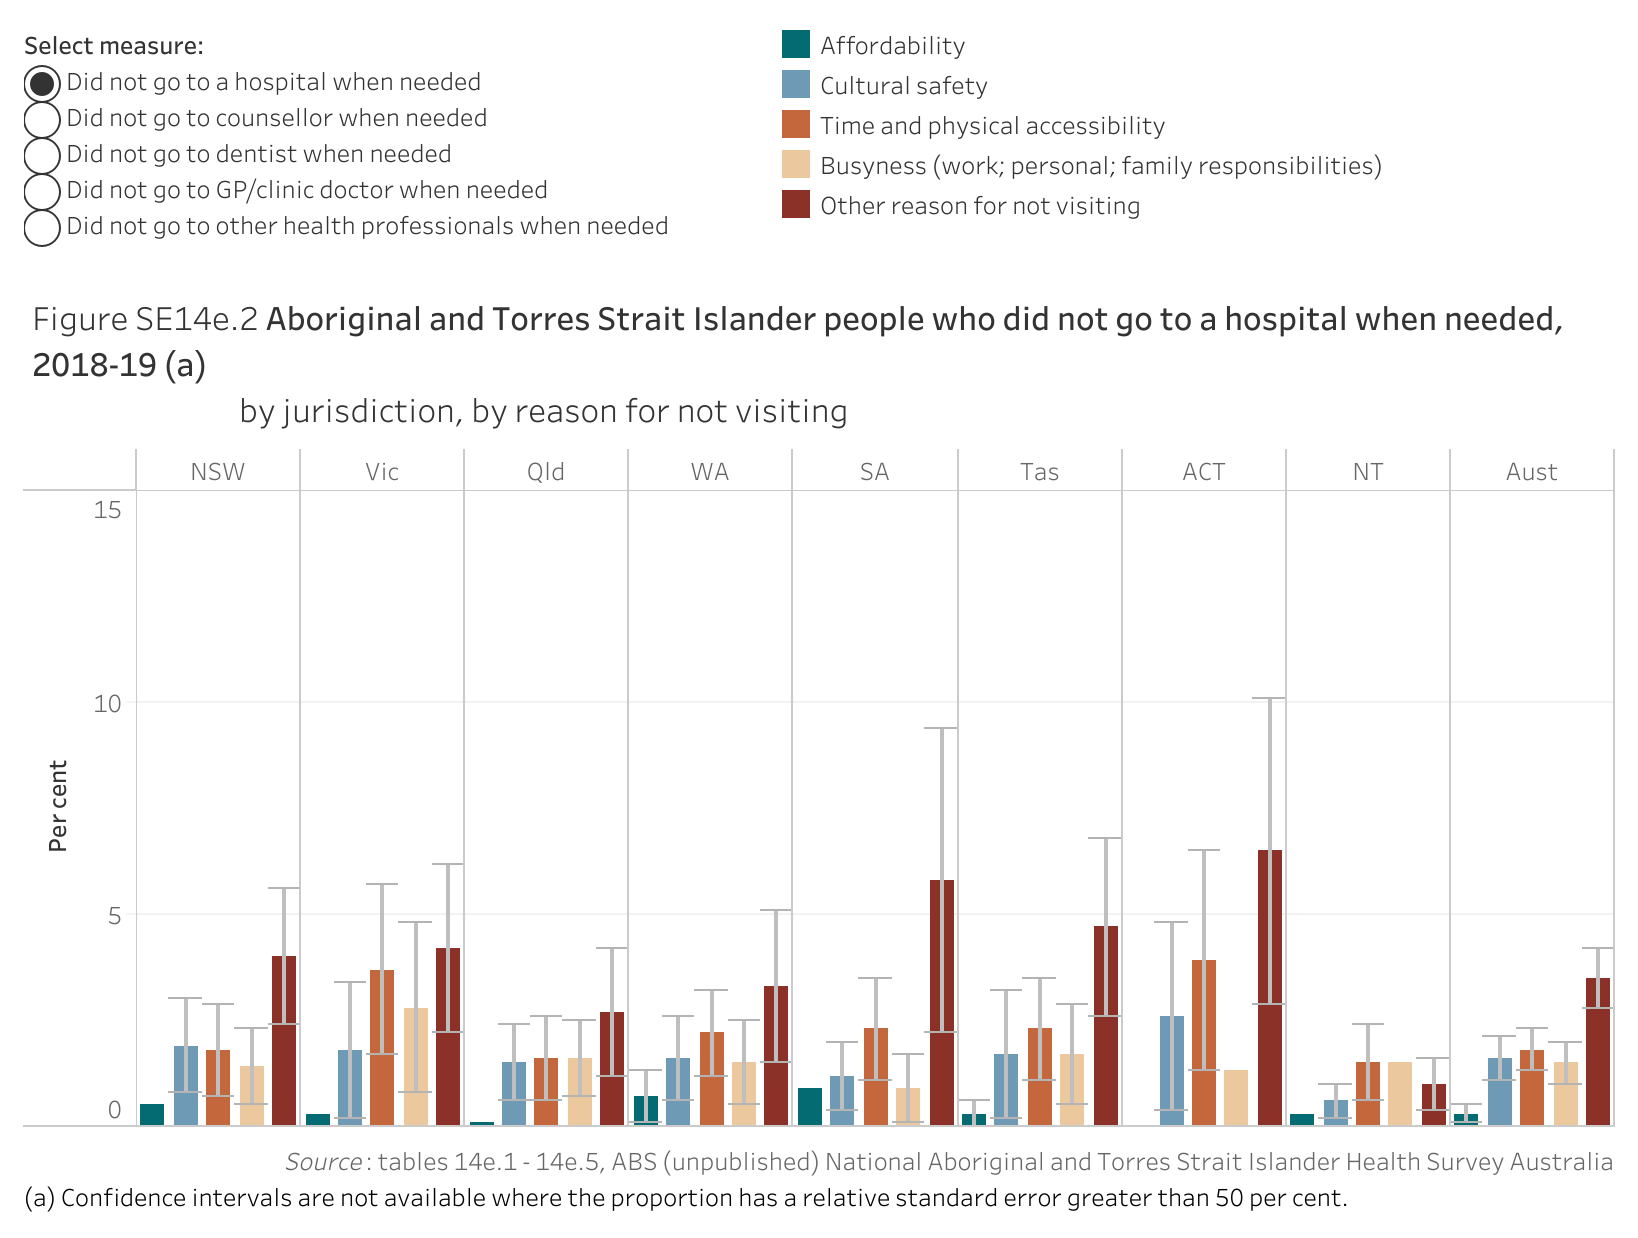 Figure SE14e.2. Bar chart showing the proportion of Aboriginal and Torres Strait Islander people who did not go to a hospital when needed in 2018-19, by jurisdiction and by reason for not visiting. Data table of figure SE14e.2 is below.